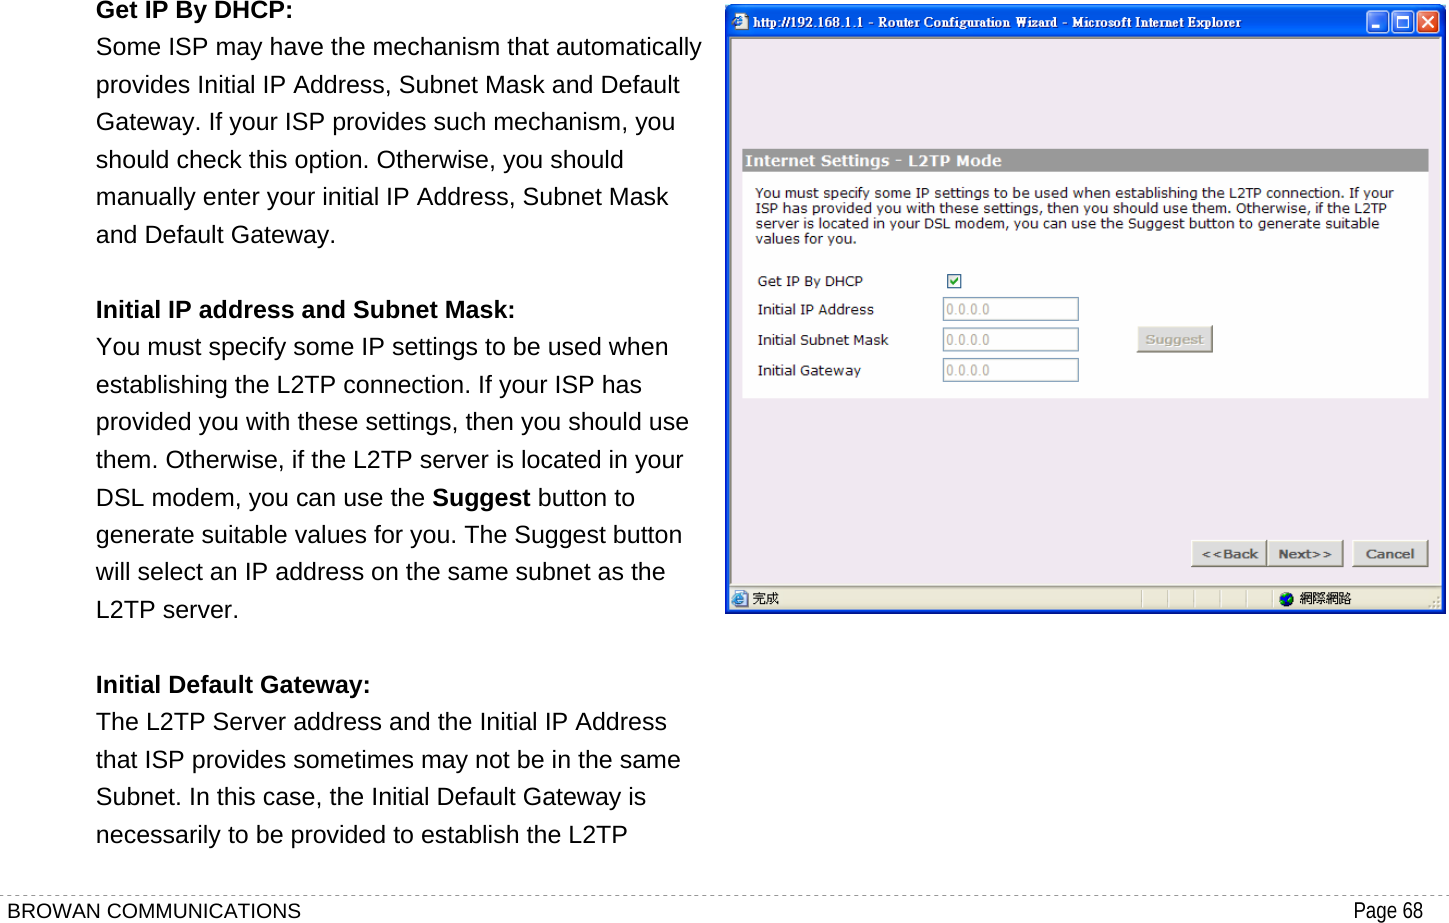 BROWAN COMMUNICATIONS                                                                                           Page 68  Get IP By DHCP: Some ISP may have the mechanism that automatically provides Initial IP Address, Subnet Mask and Default Gateway. If your ISP provides such mechanism, you should check this option. Otherwise, you should manually enter your initial IP Address, Subnet Mask and Default Gateway.  Initial IP address and Subnet Mask: You must specify some IP settings to be used when establishing the L2TP connection. If your ISP has provided you with these settings, then you should use them. Otherwise, if the L2TP server is located in your DSL modem, you can use the Suggest button to generate suitable values for you. The Suggest button will select an IP address on the same subnet as the L2TP server.  Initial Default Gateway: The L2TP Server address and the Initial IP Address that ISP provides sometimes may not be in the same Subnet. In this case, the Initial Default Gateway is necessarily to be provided to establish the L2TP  